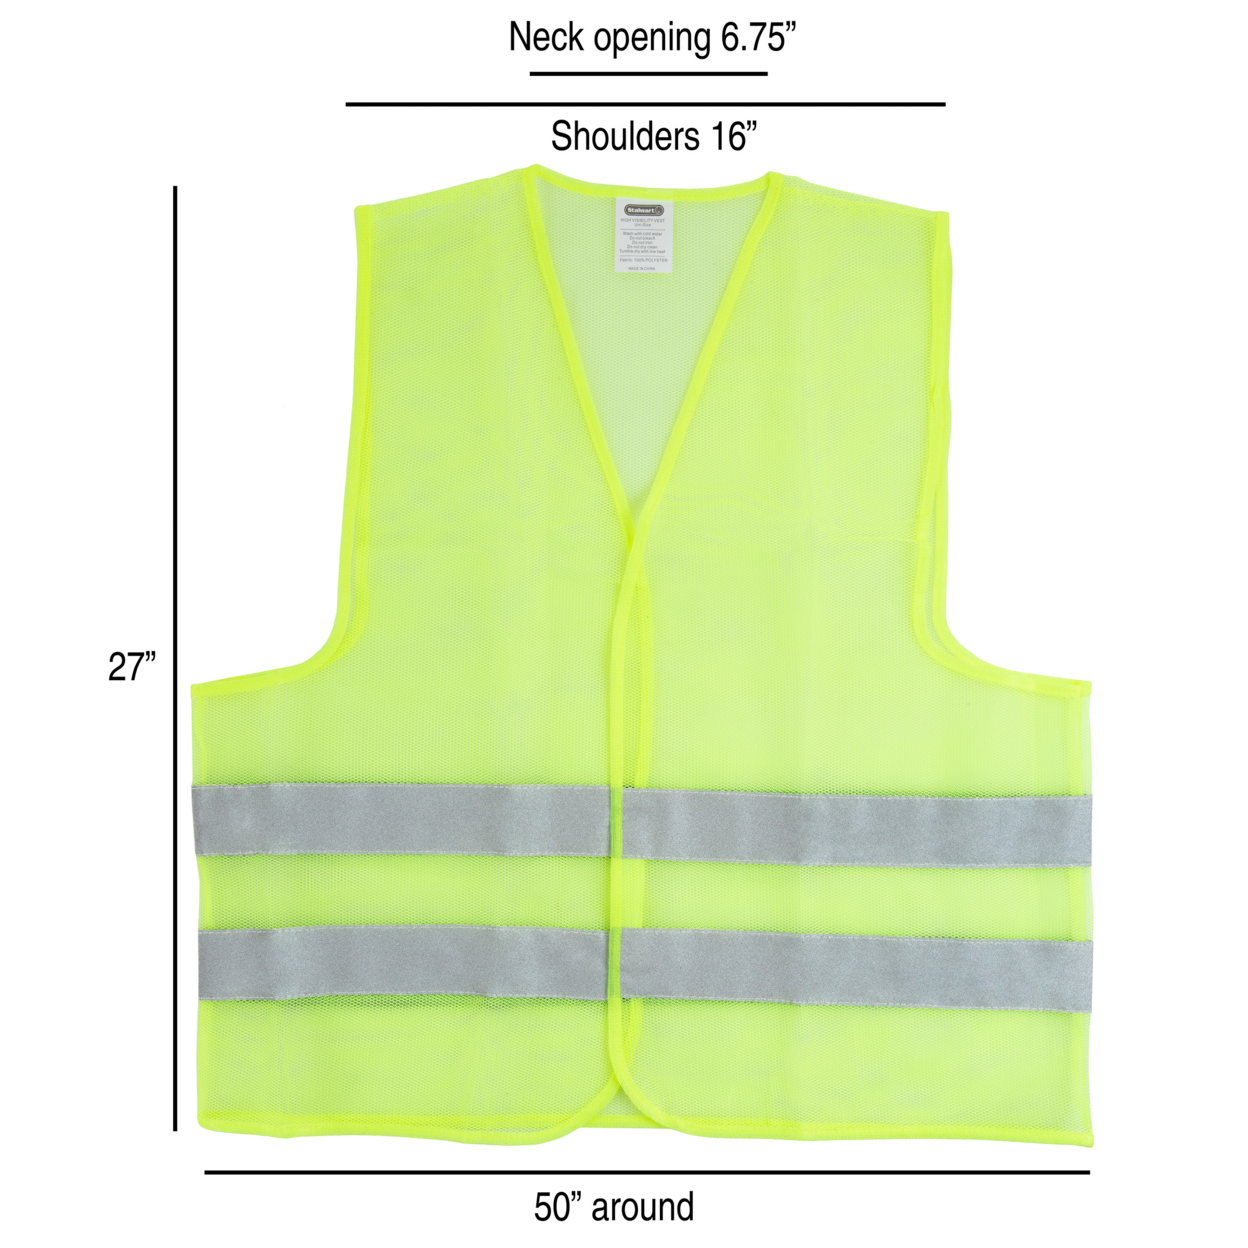 Set Of 10 Mesh High Visibility Reflective Vest Fluorescent Green With Silver Stripe Workwear With Hook And Loop Closures